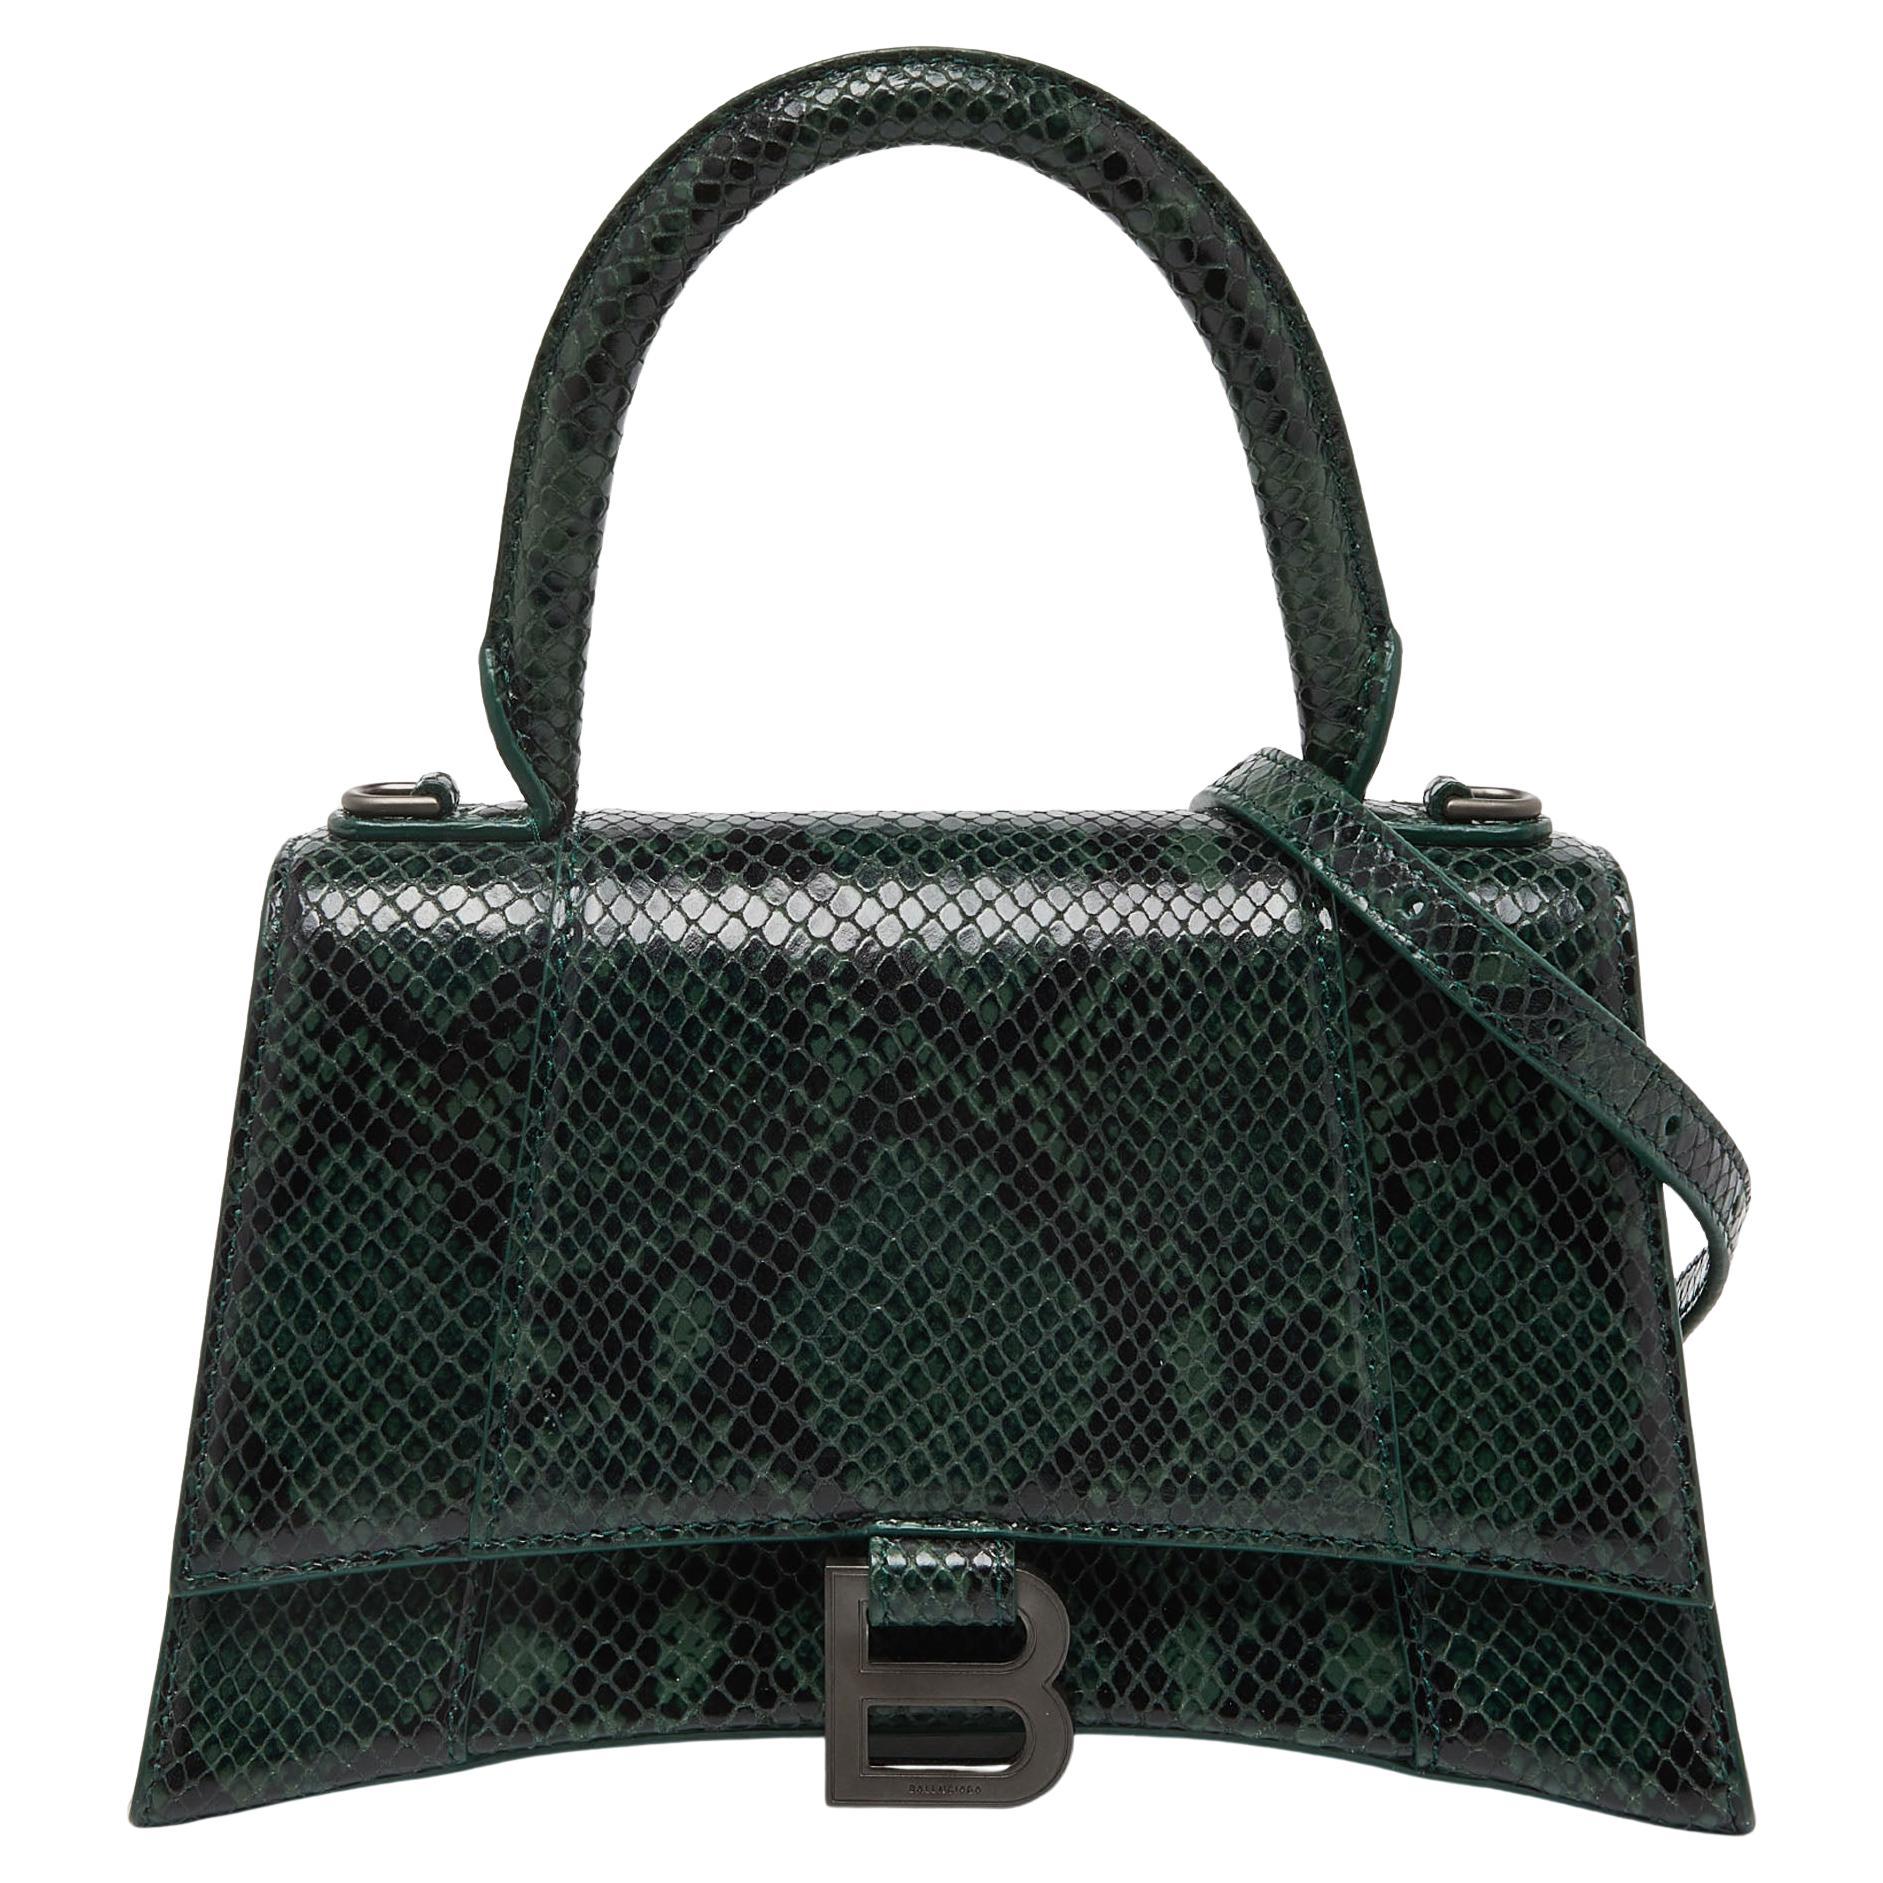 Balenciaga Green Snakeskin Embossed Leather Small Hourglass Top Handle Bag